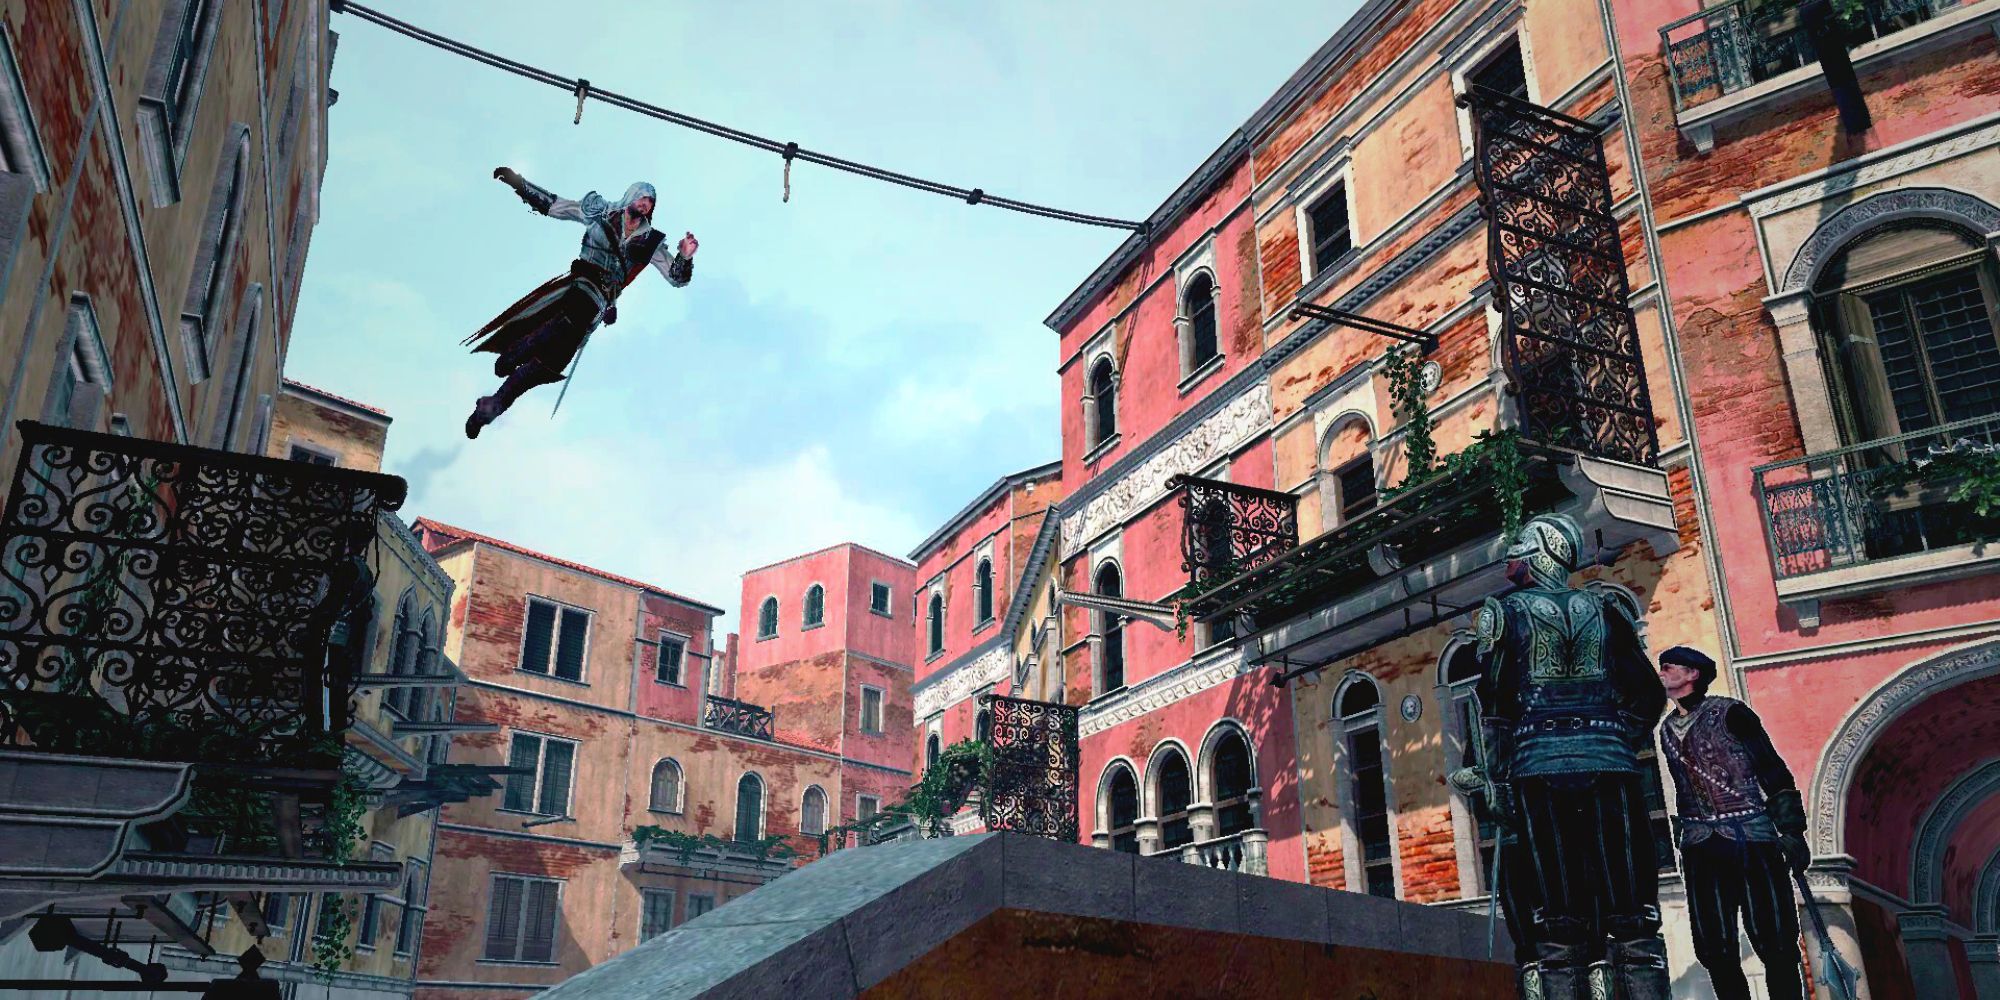 ezio from assassin's creed leaping from above onto two guards